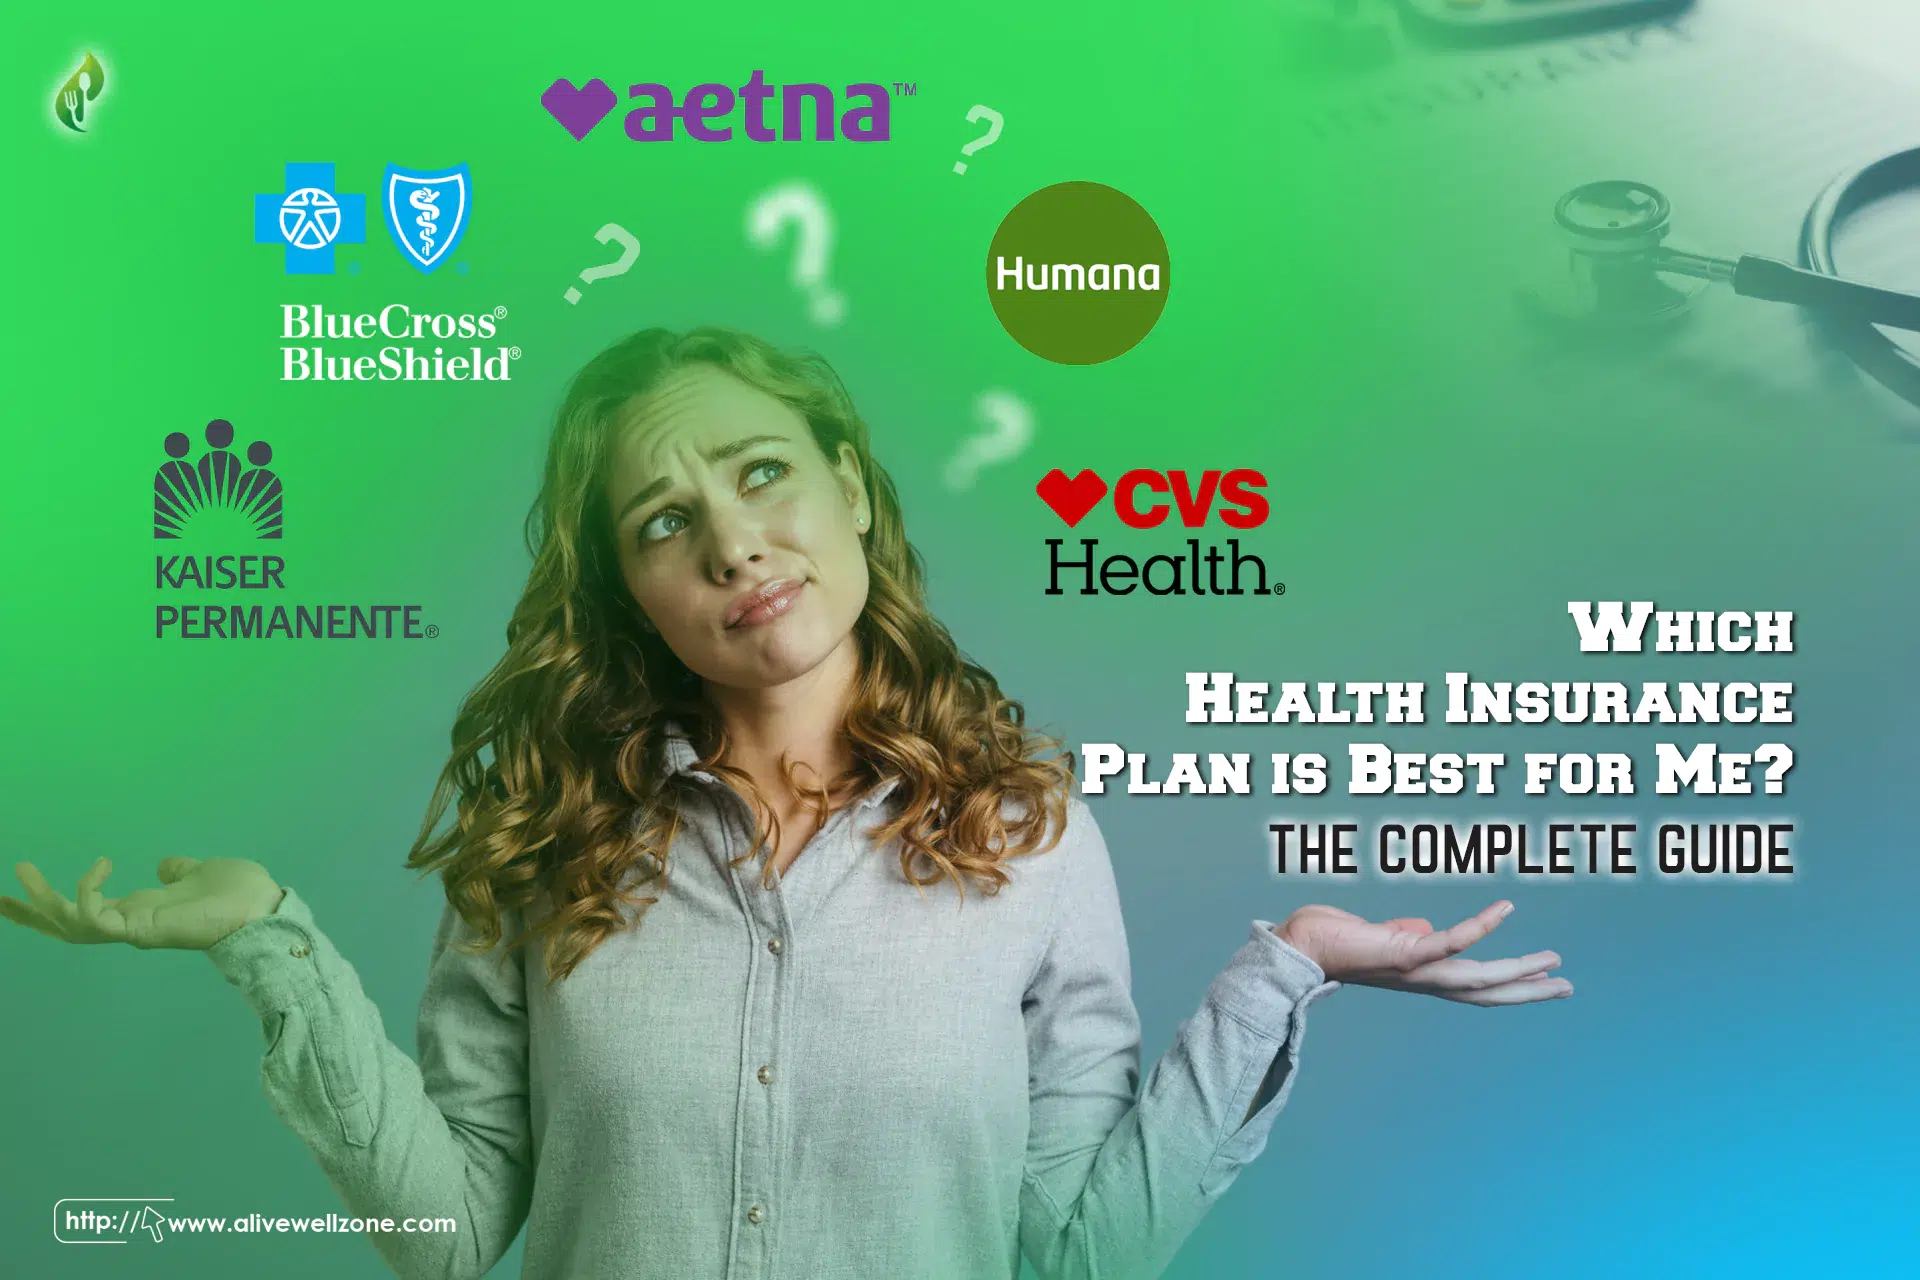 which health insurance plan is best for me?